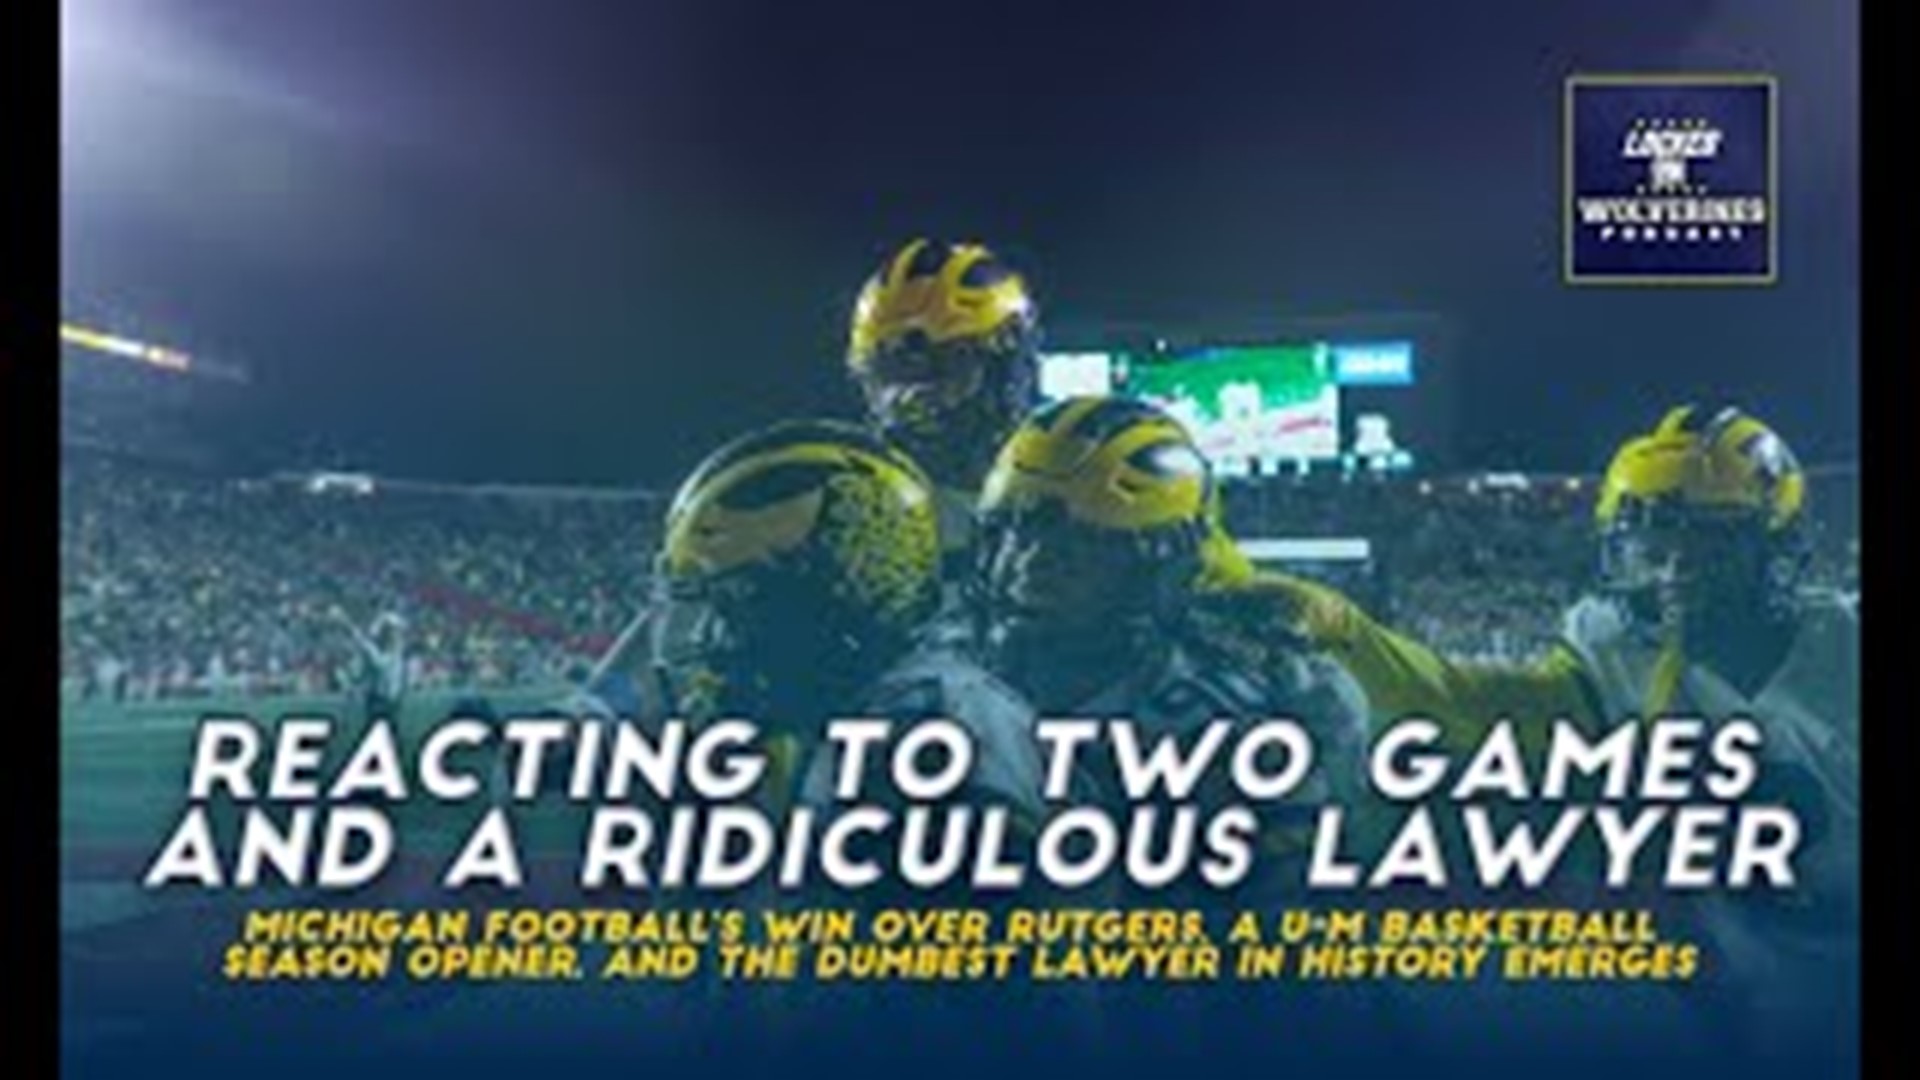 Locked On Wolverines discusses the Michigan football win over Rutgers, the Michigan basketball win over Purdue Fort Wayne and a ridiculous MSU lawyer letter.